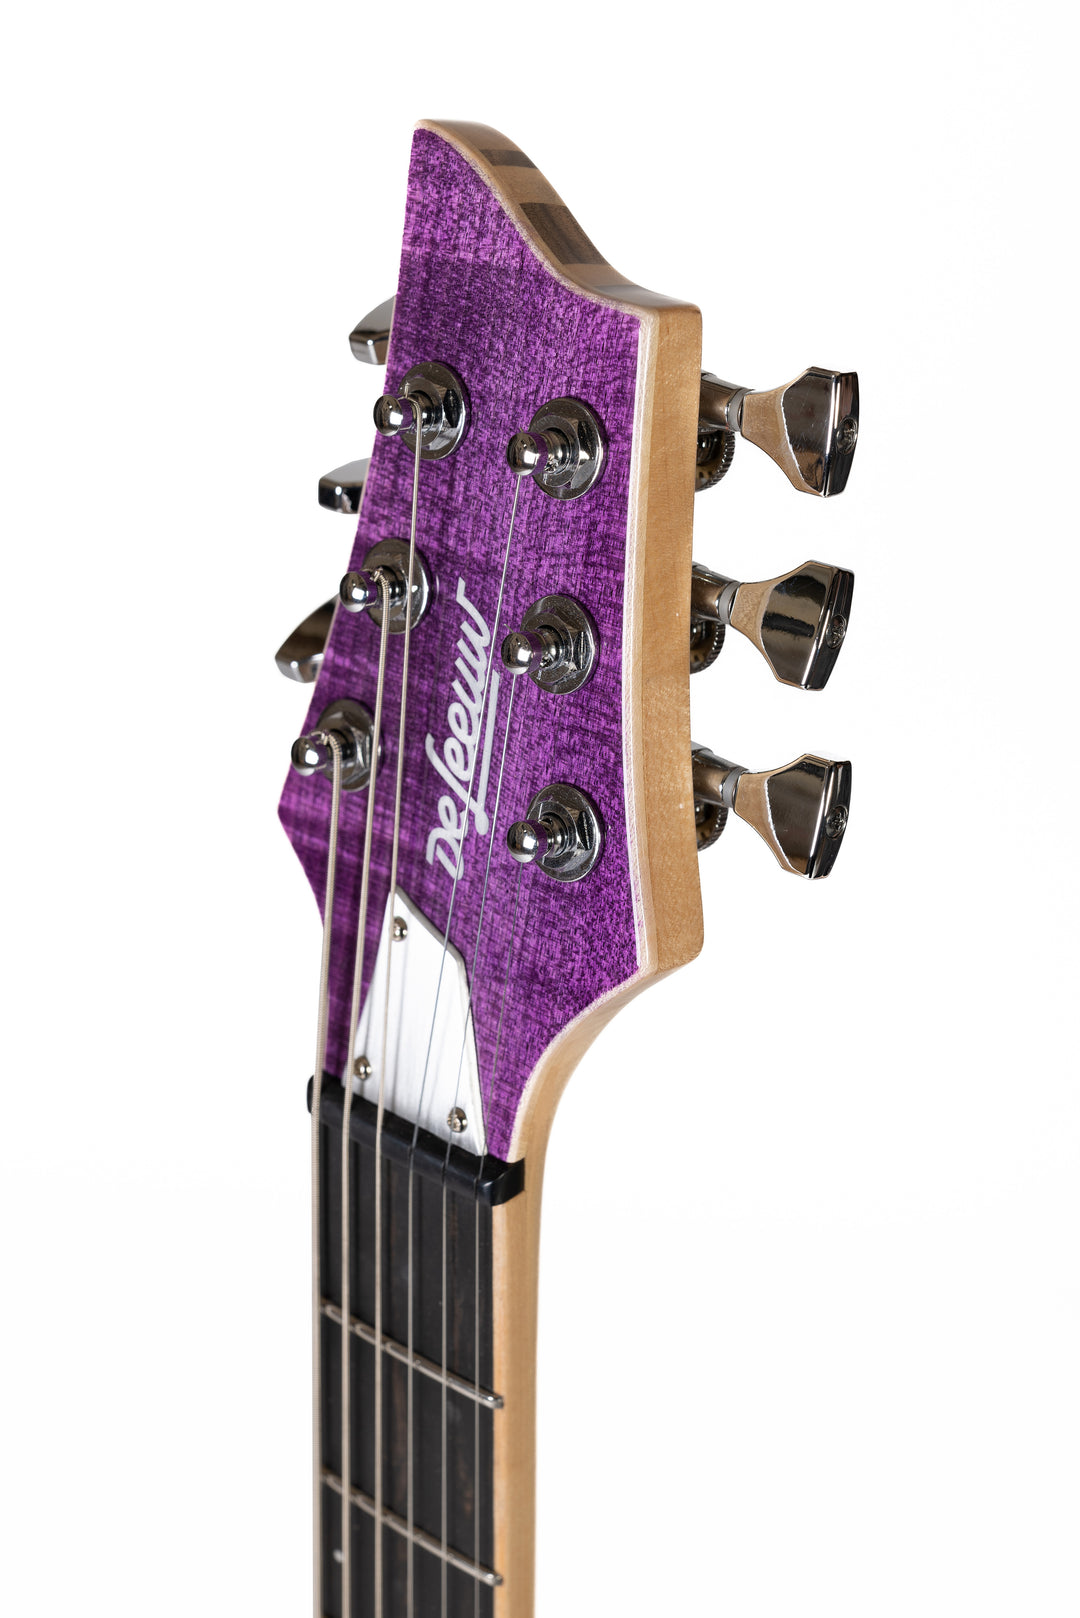 Nina_Guitar_Lavender_fields_of_Provence_Glossy_Close_up_Head_Side_1_De_Leeuw_Guitars_Paris_Made_in_France_Luthier_Guitar_Maker_France_Neck_Through_Manche_Traversant